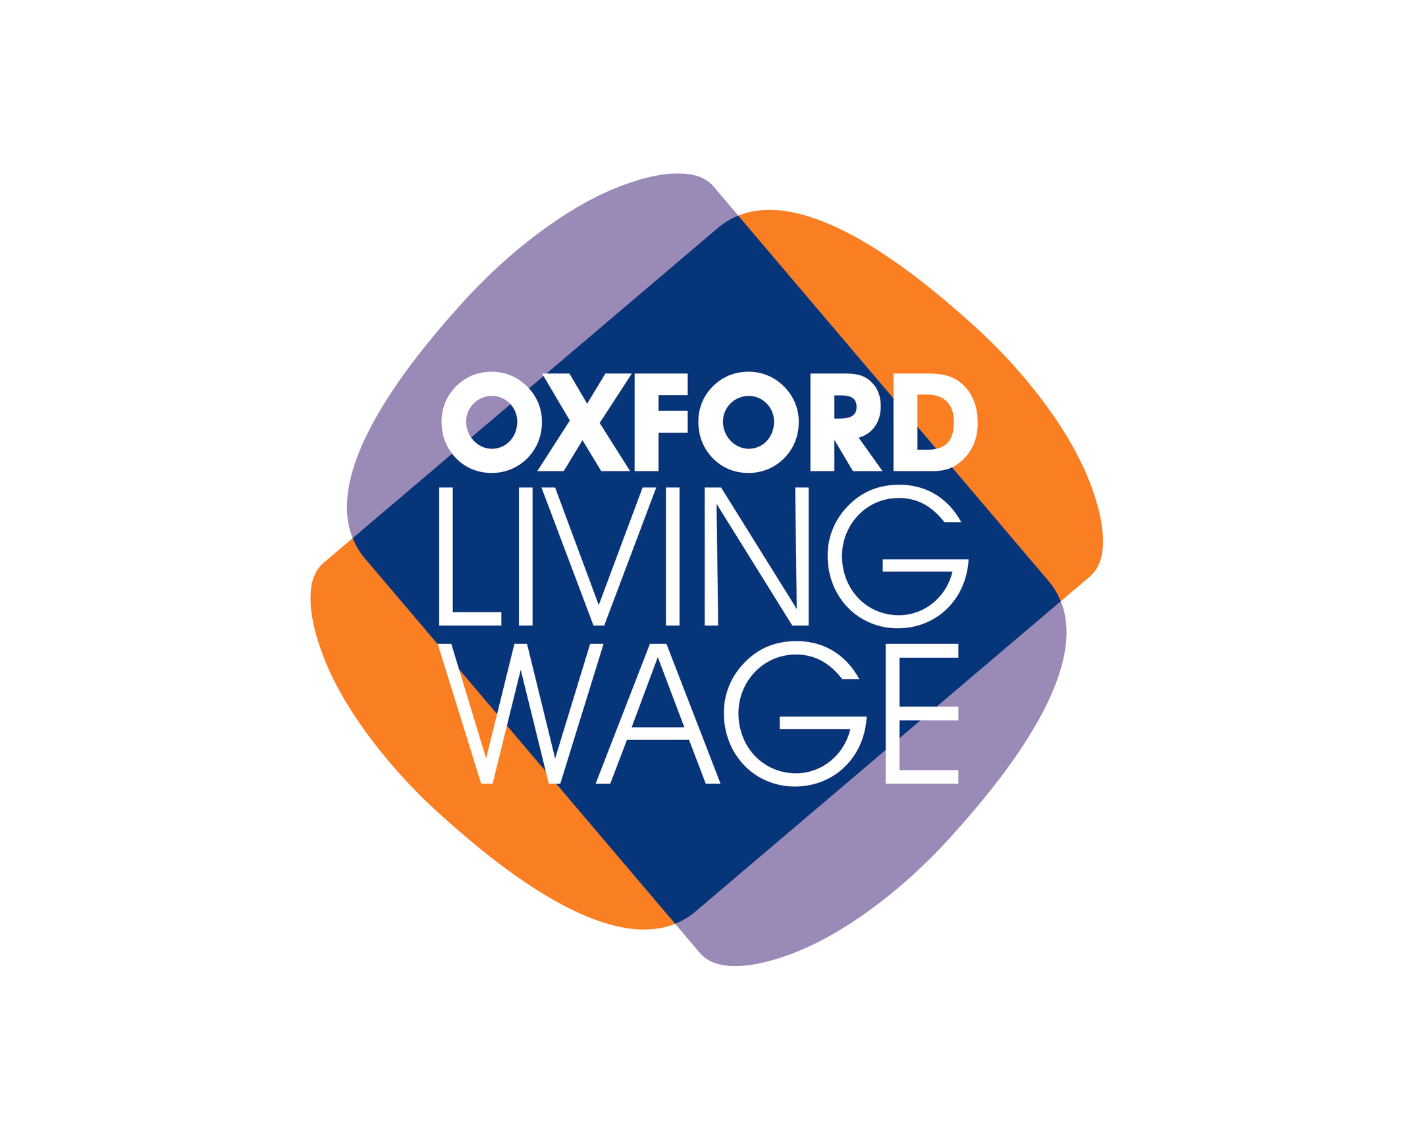 We're proud to be an Oxford Living Wage Employer